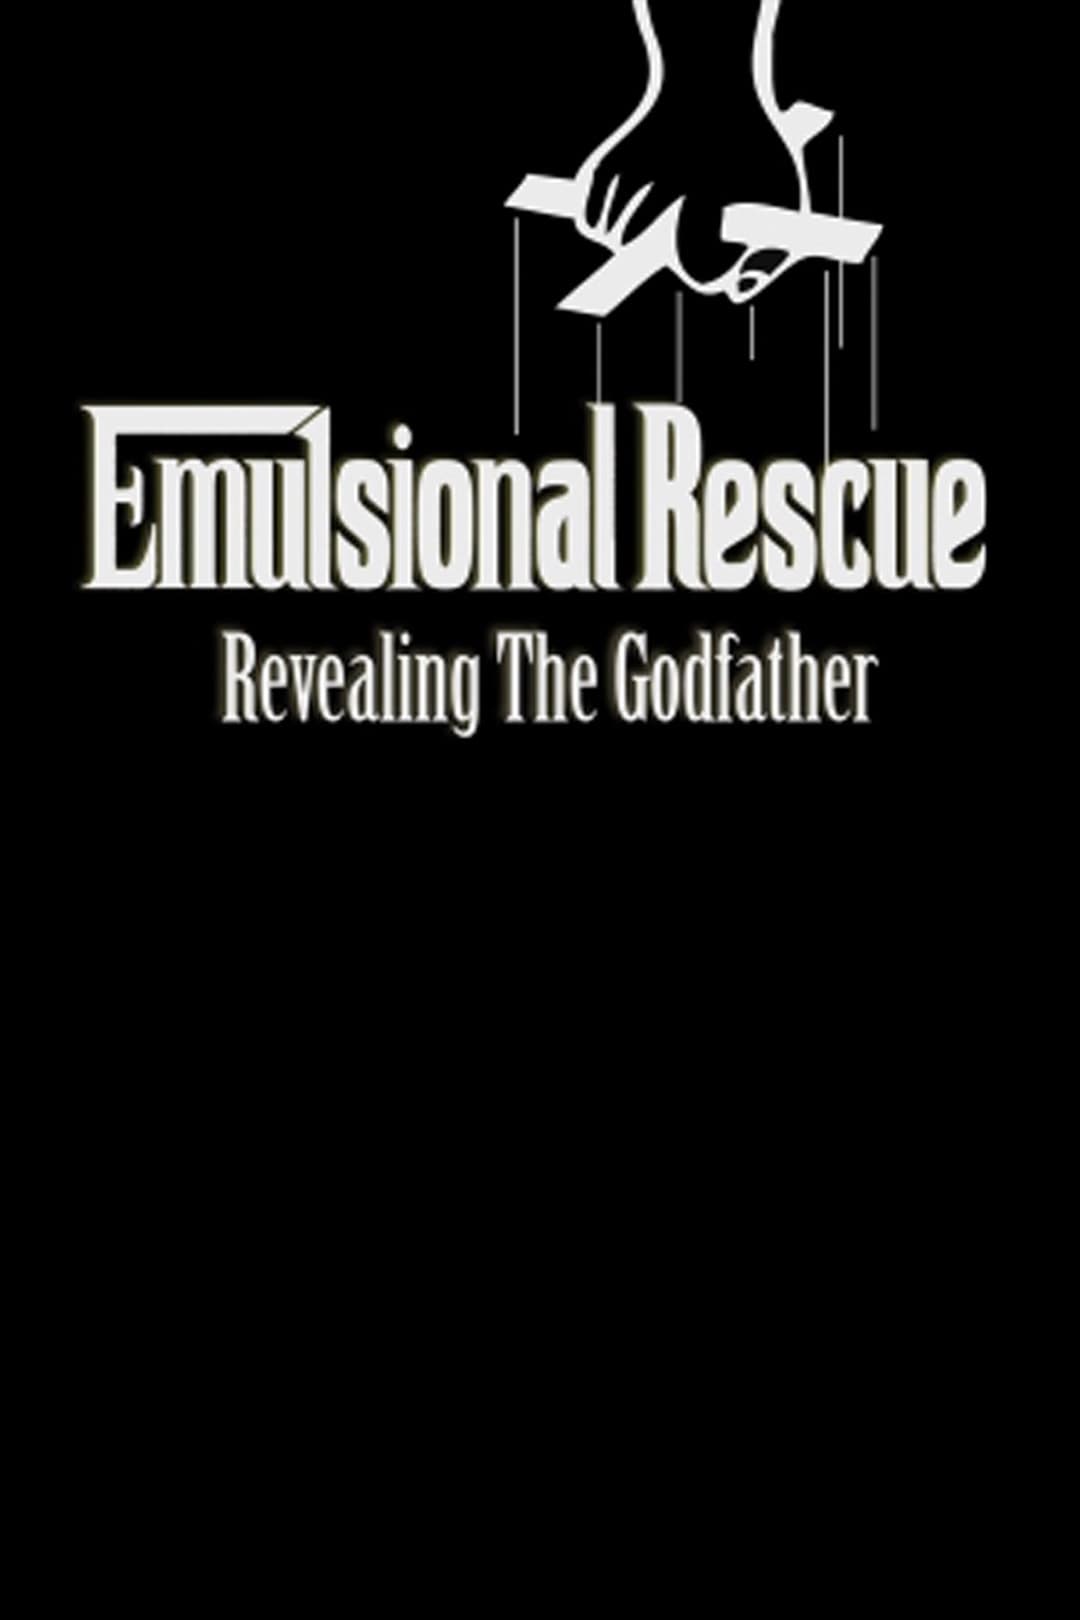 Emulsional Rescue: Revealing 'The Godfather' (2008)